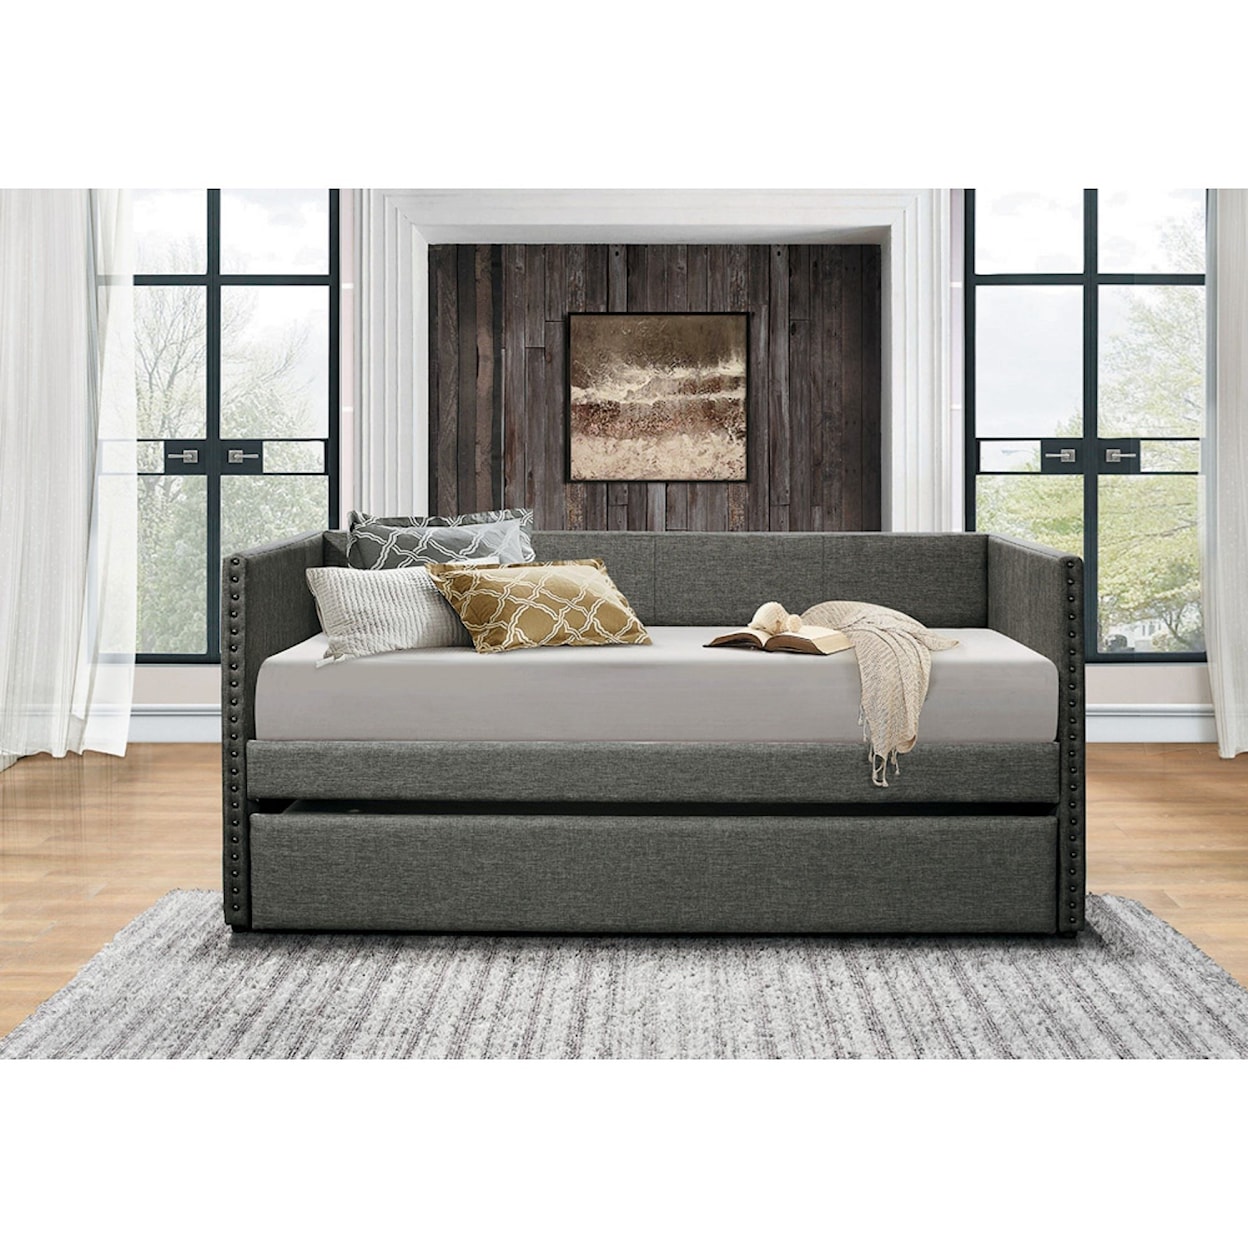 Homelegance Daybeds Therese Daybed